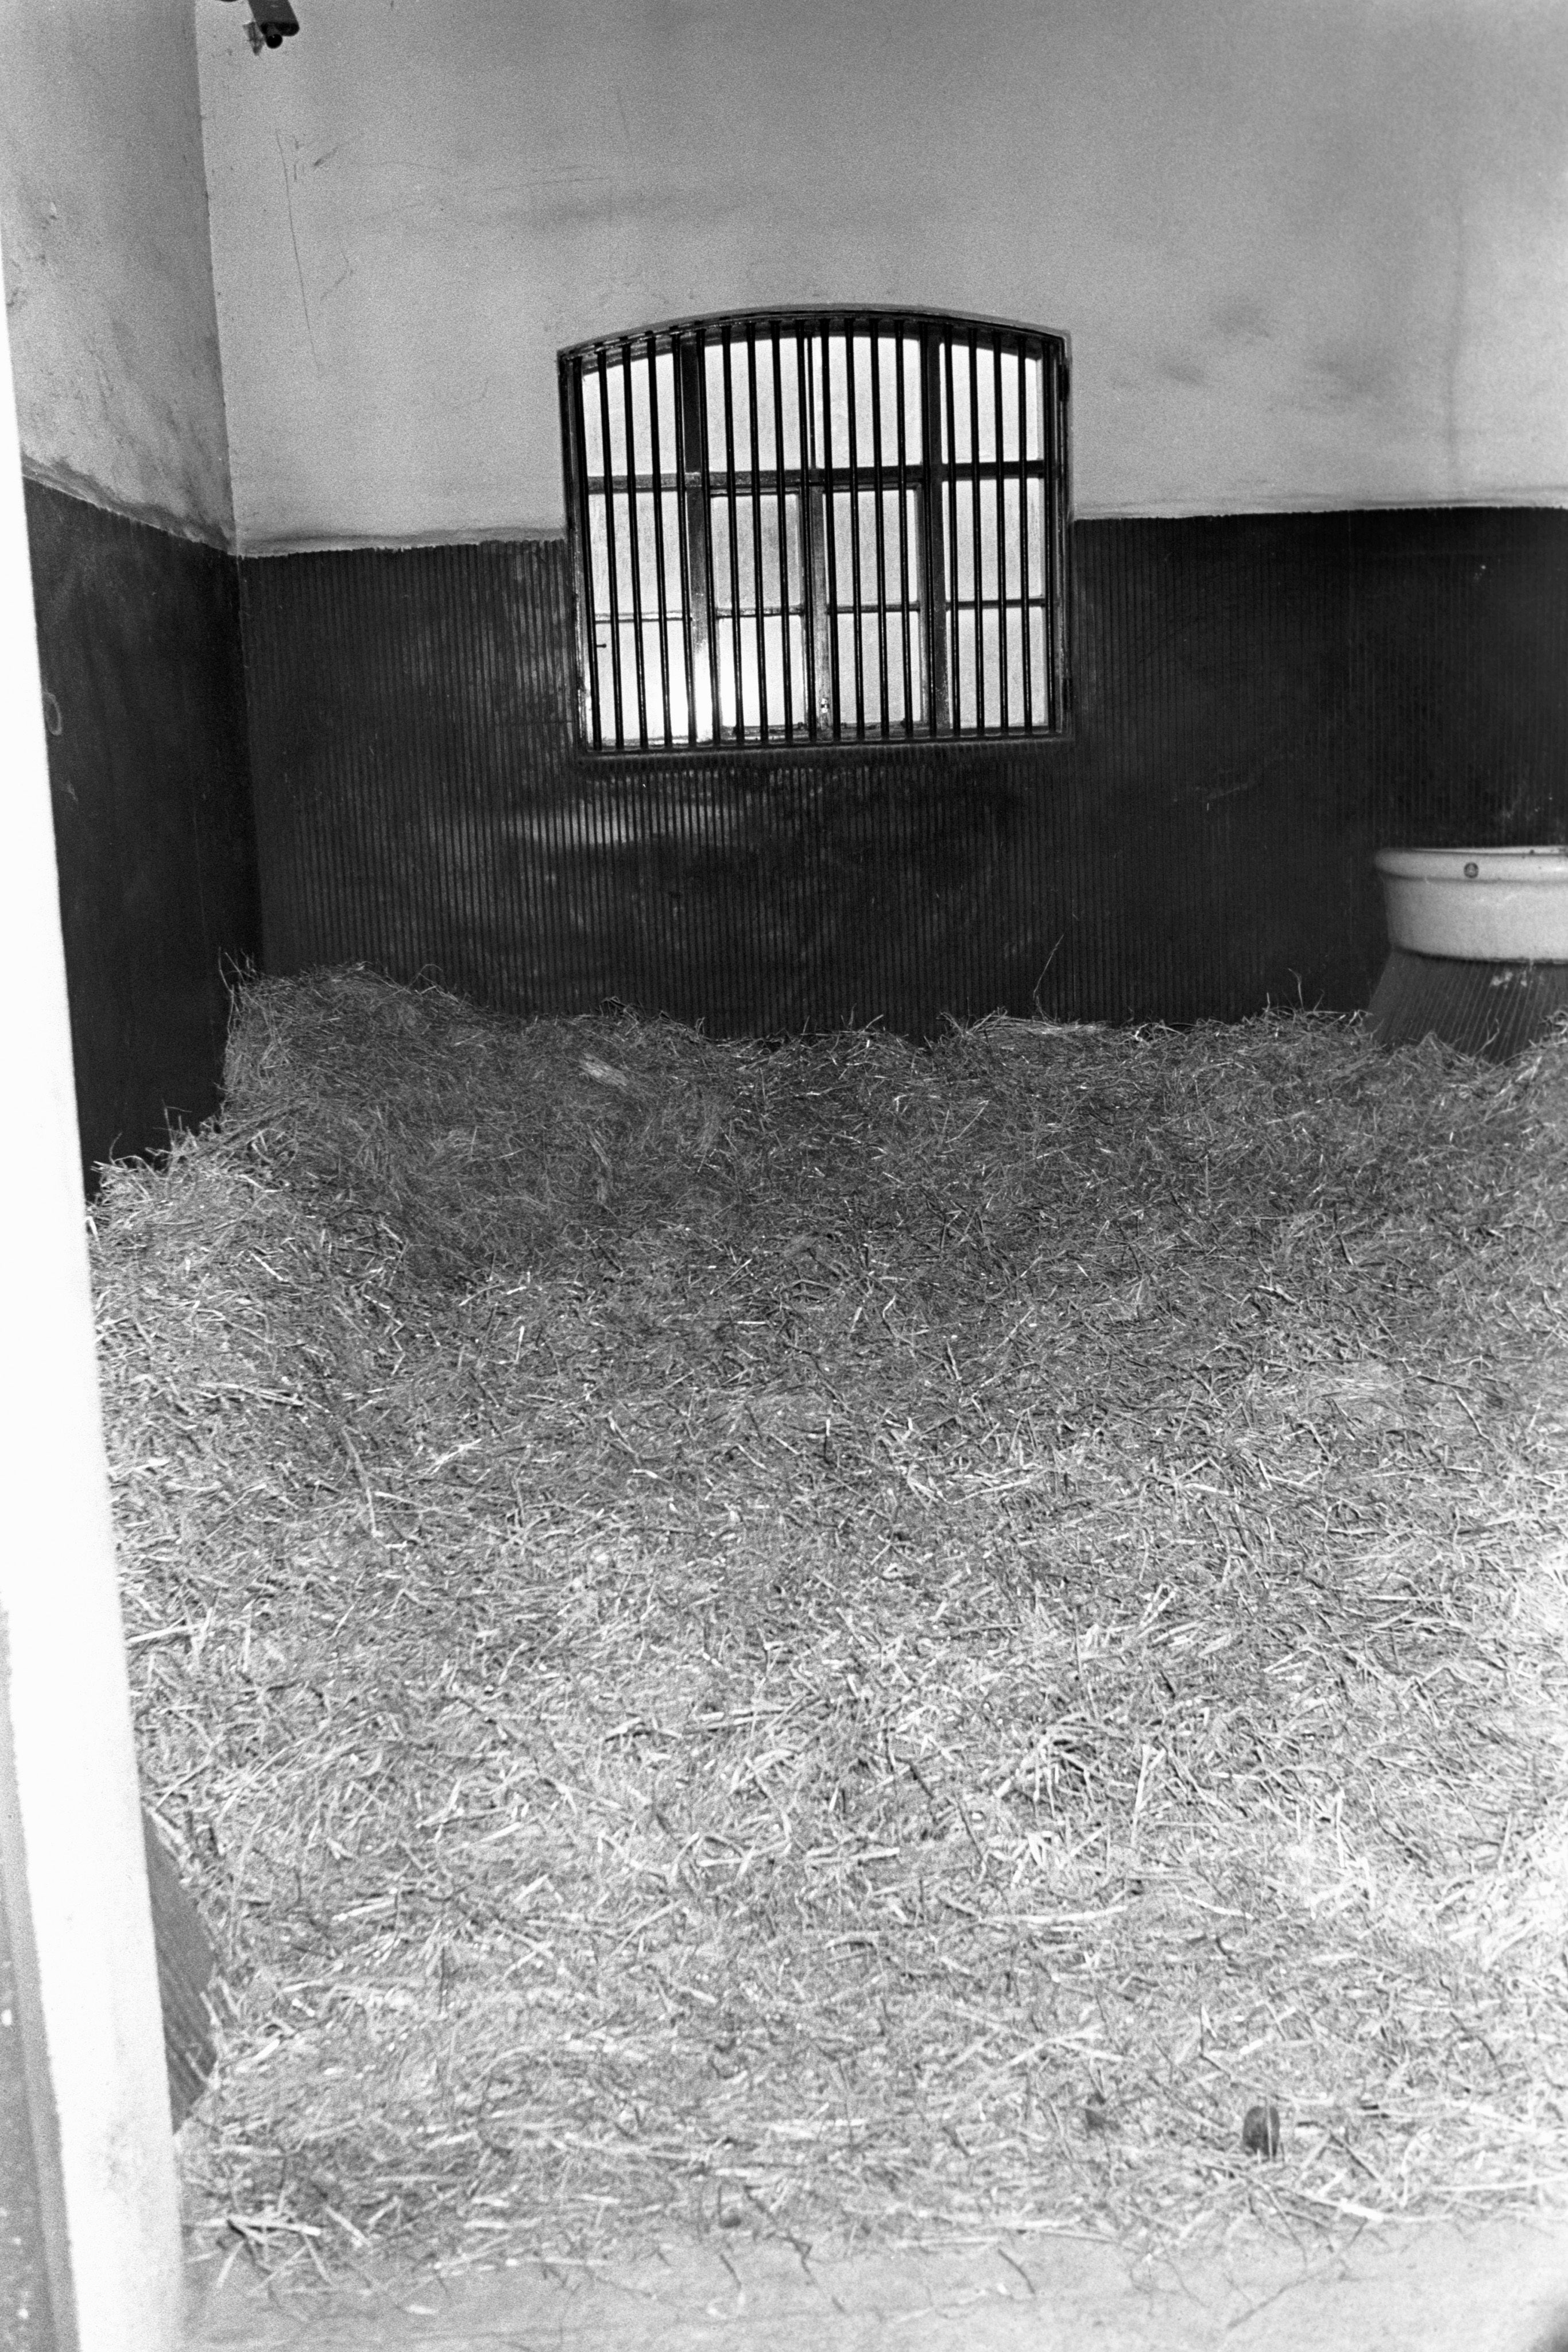 Image of Shergar’s empty stable box where was taken from on February 8, 1983 at the Aga Khan's stud farm in Ballymany, County Kildare